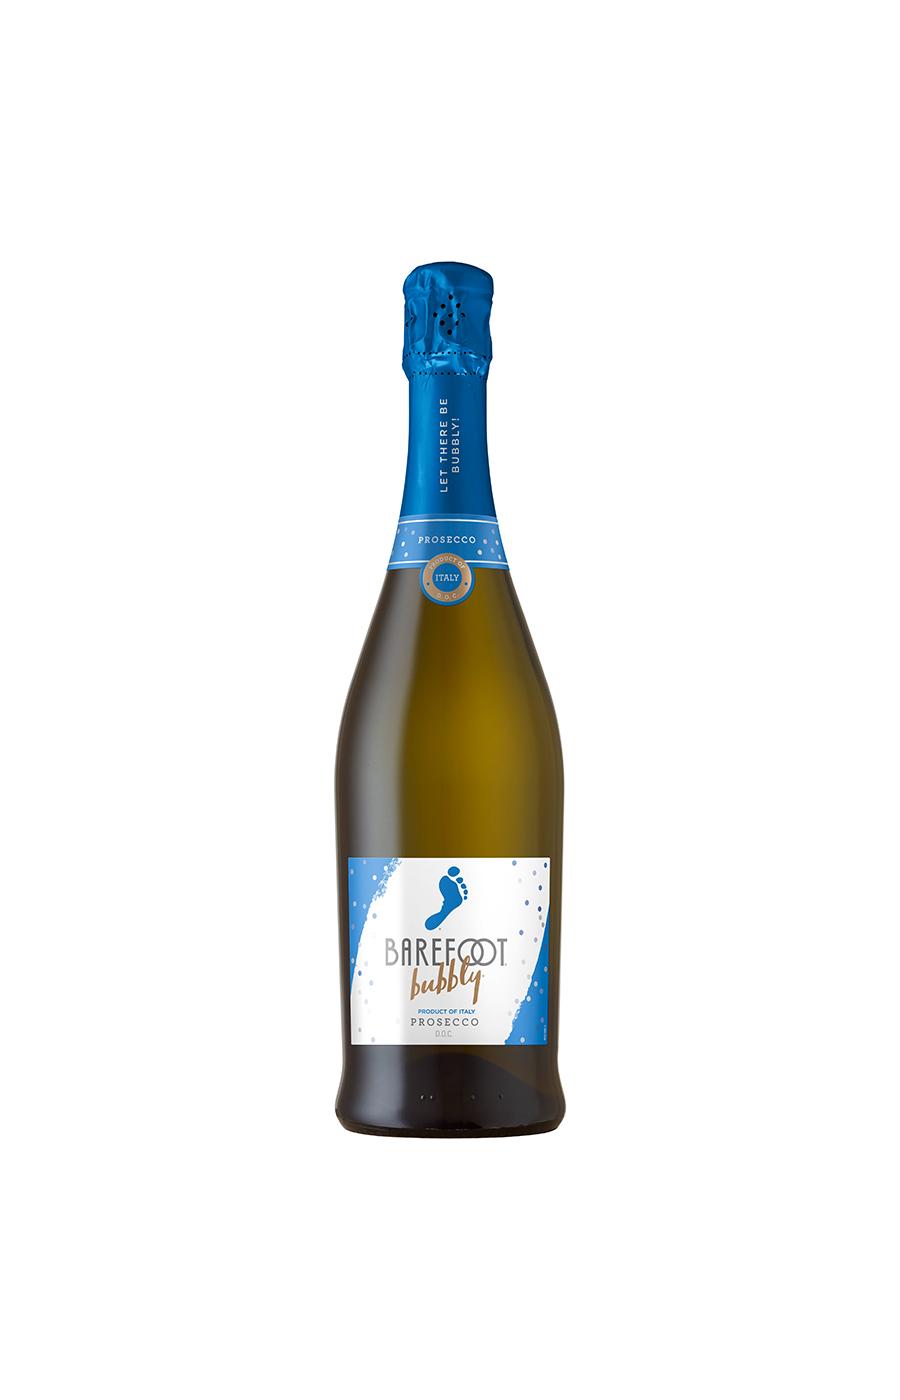 Barefoot Bubbly Prosecco Sparkling Wine; image 1 of 2